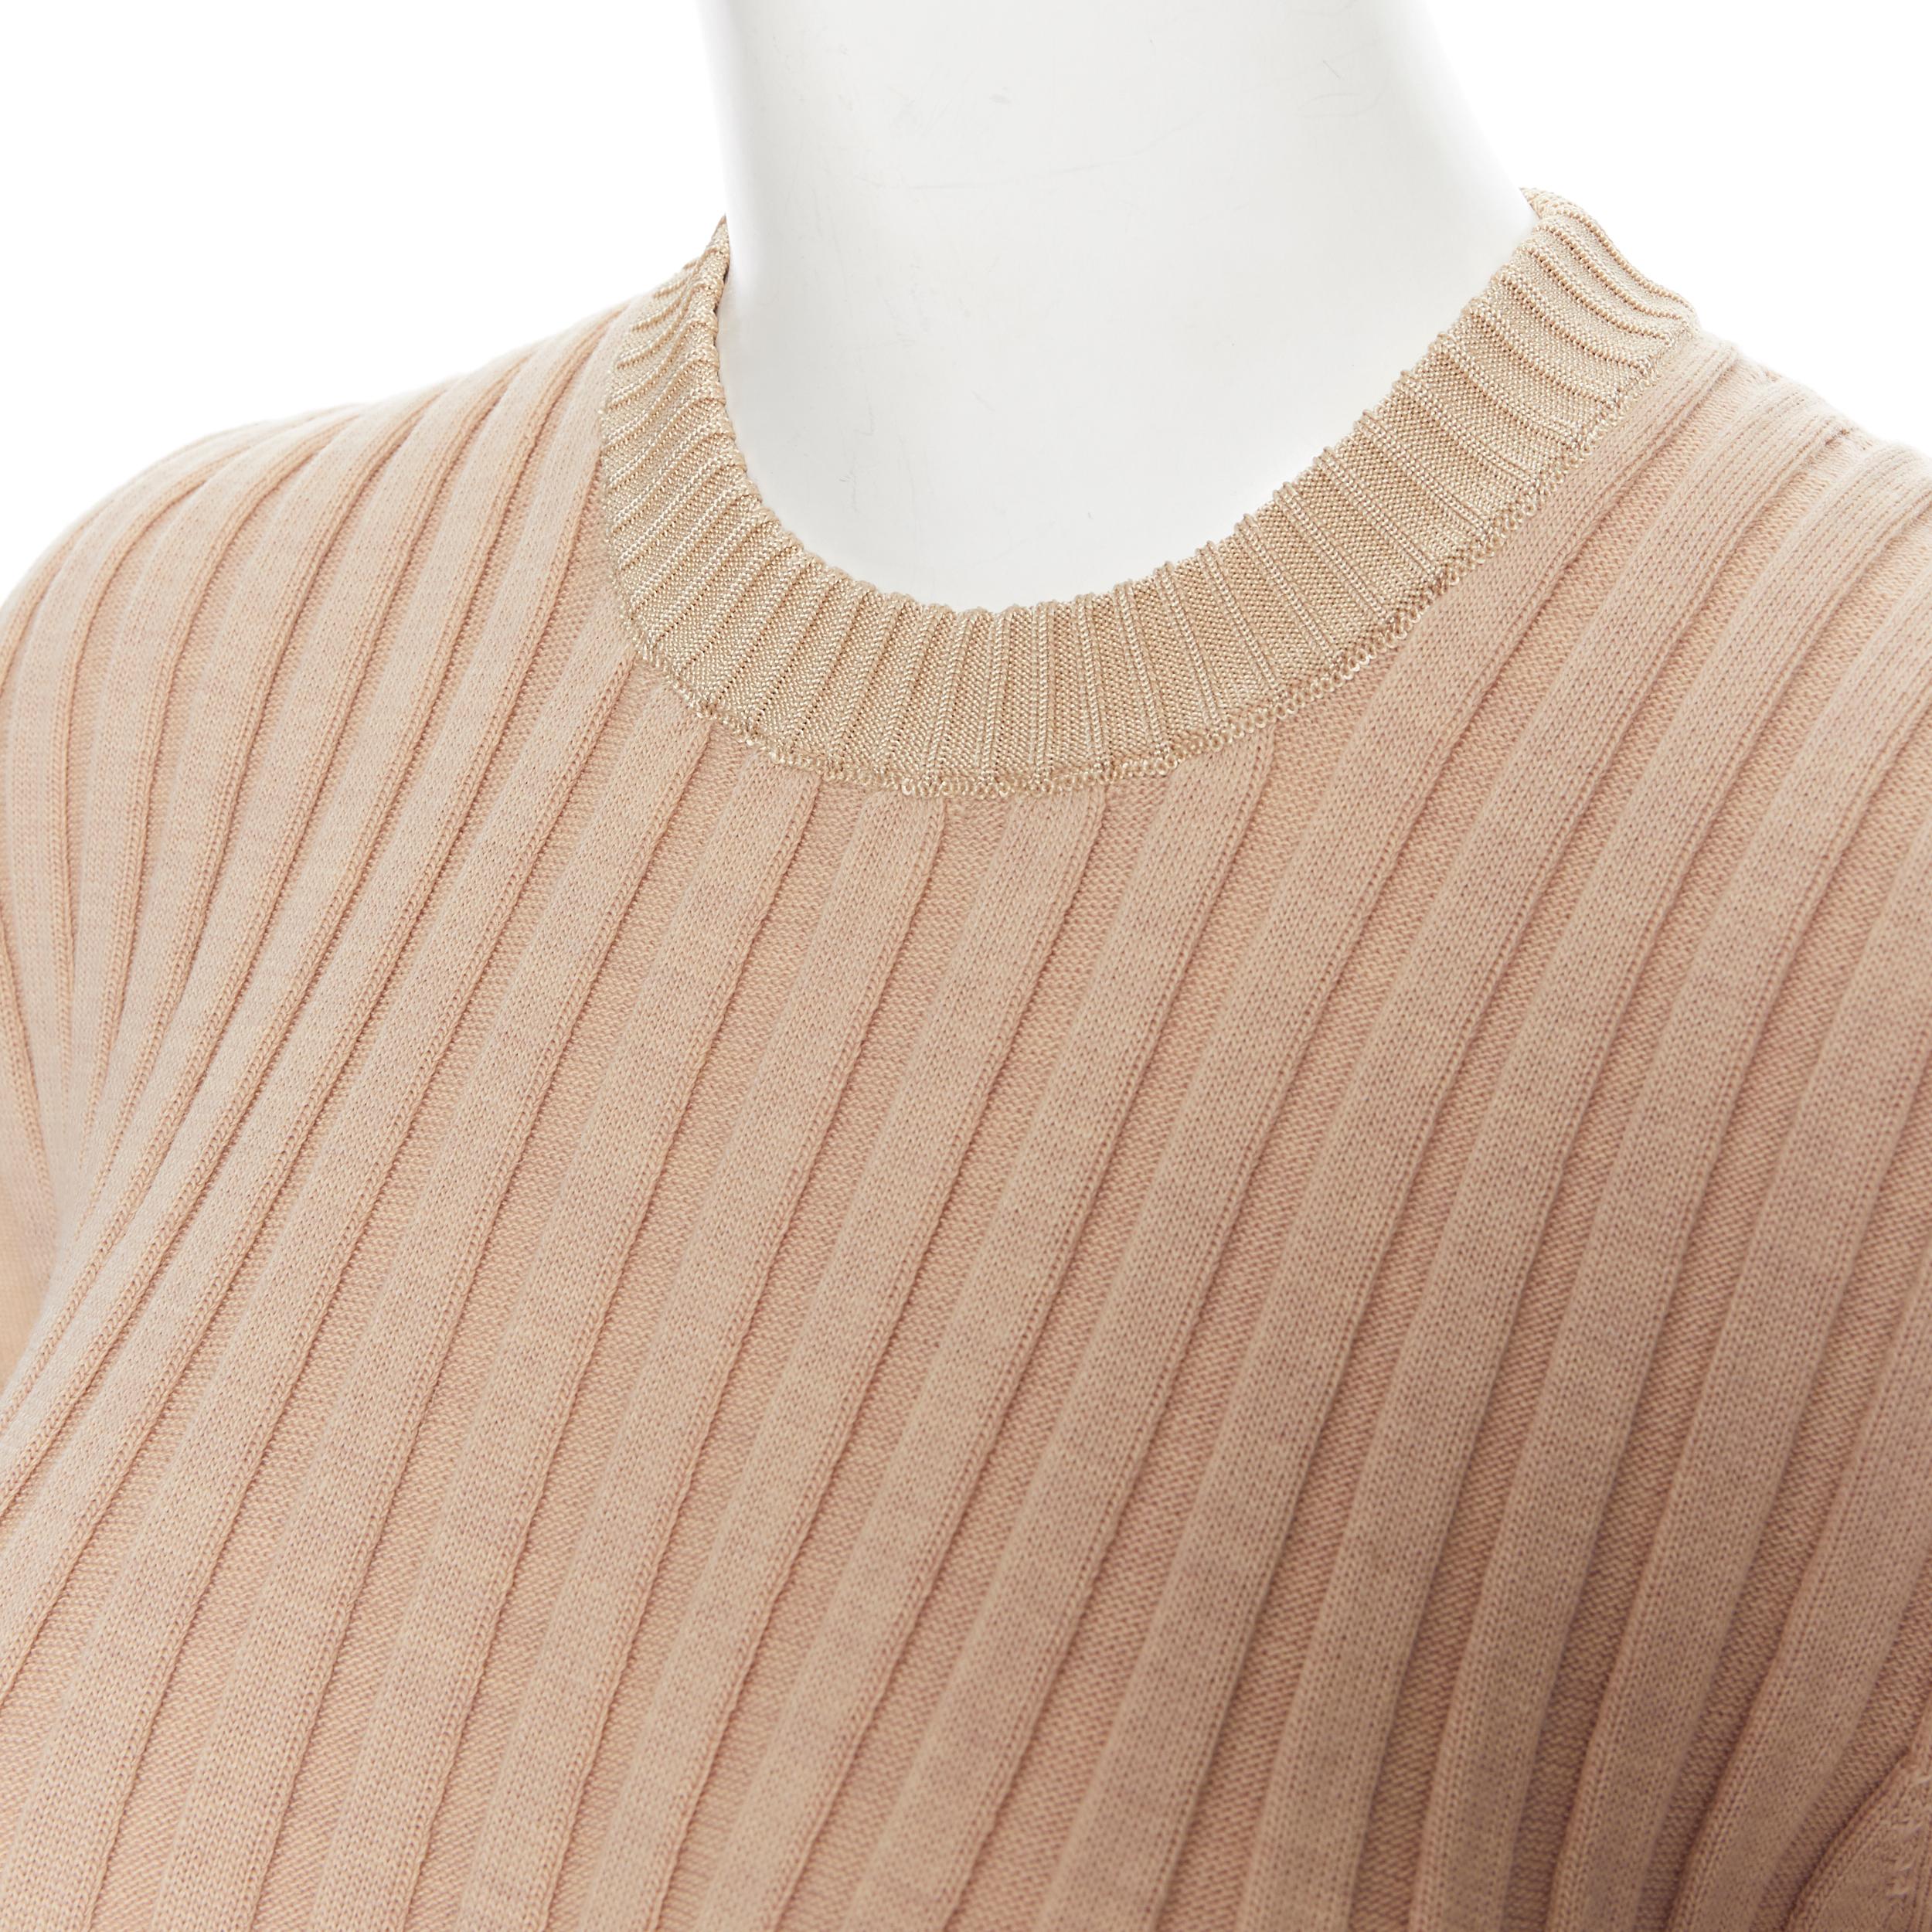 Women's runway OLD CELINE Phoebe Philo beige ribbed knit flared bell cuff sweater top XS